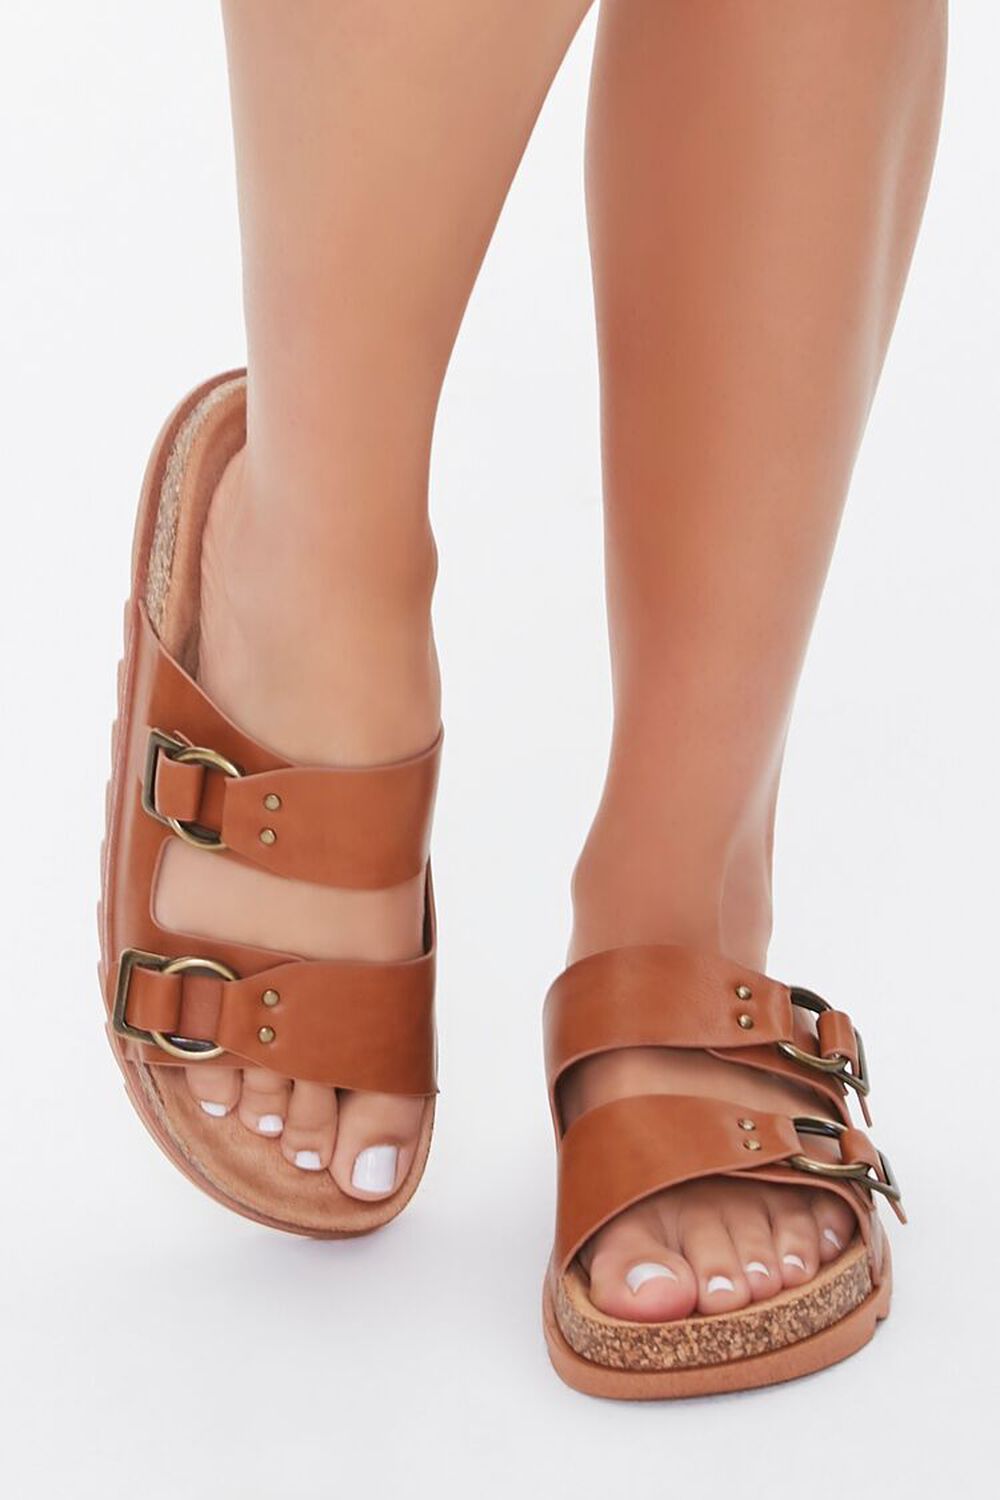 TAN Faux Leather Buckled Sandals, image 2